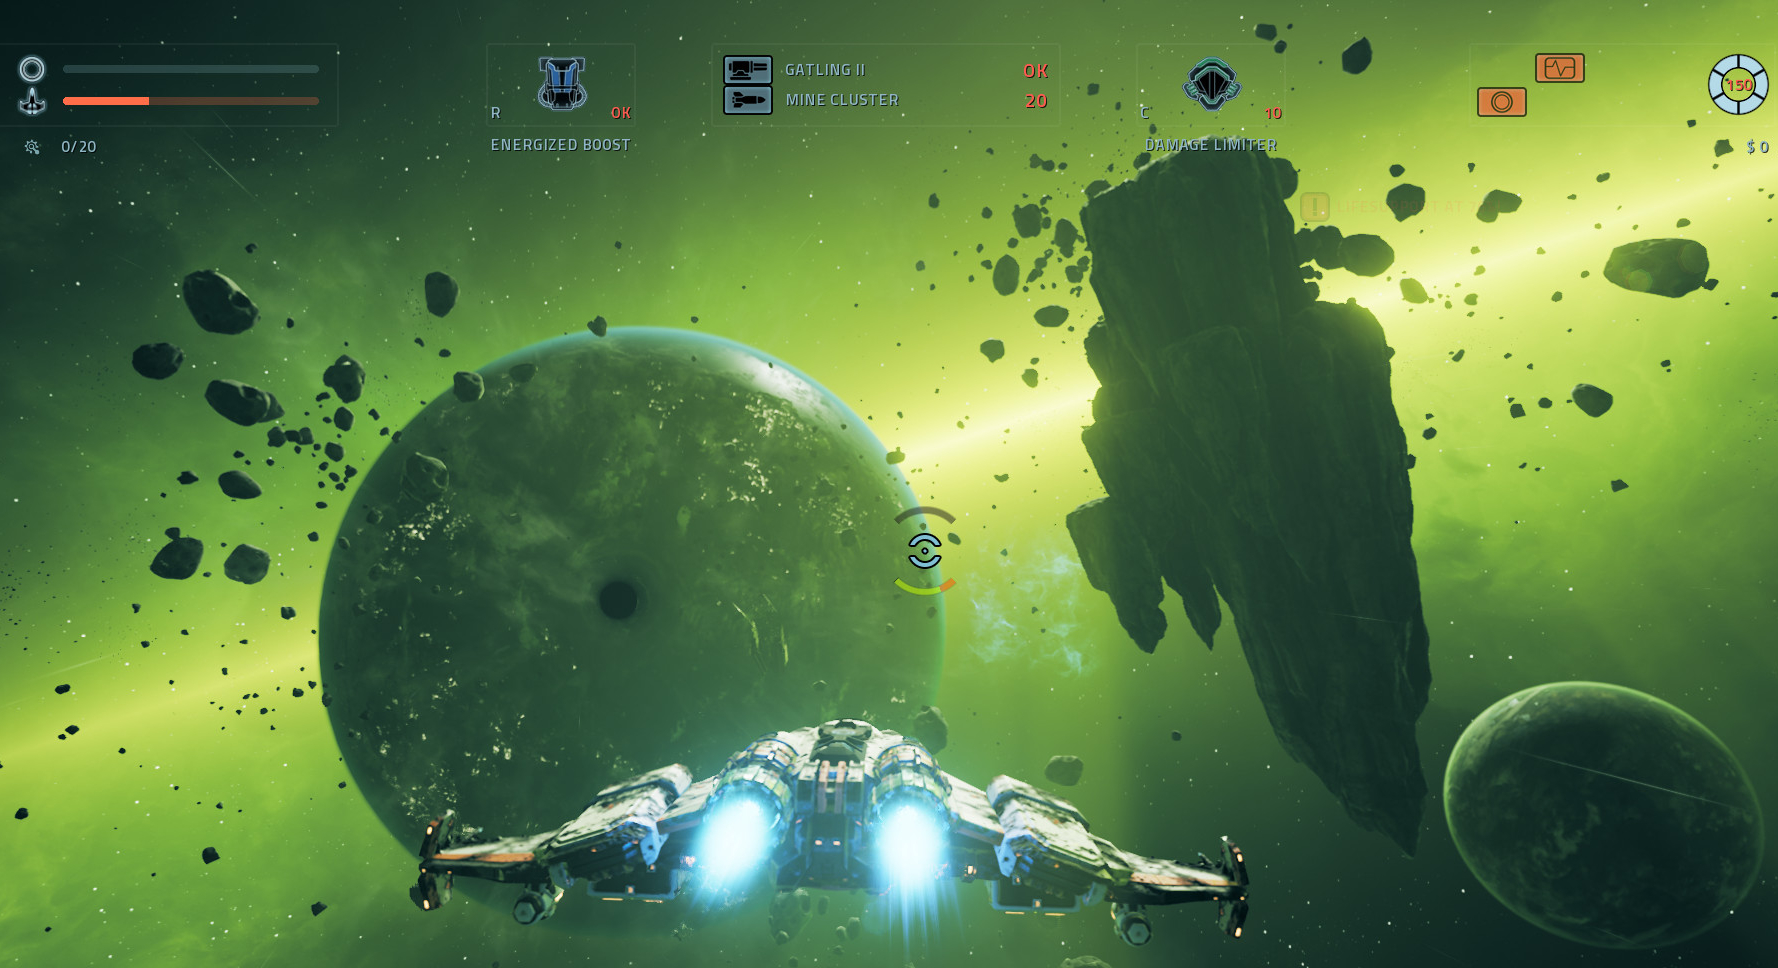 Steam’s Latest Hit: An Intense Spaceship Roguelike Called Everspace